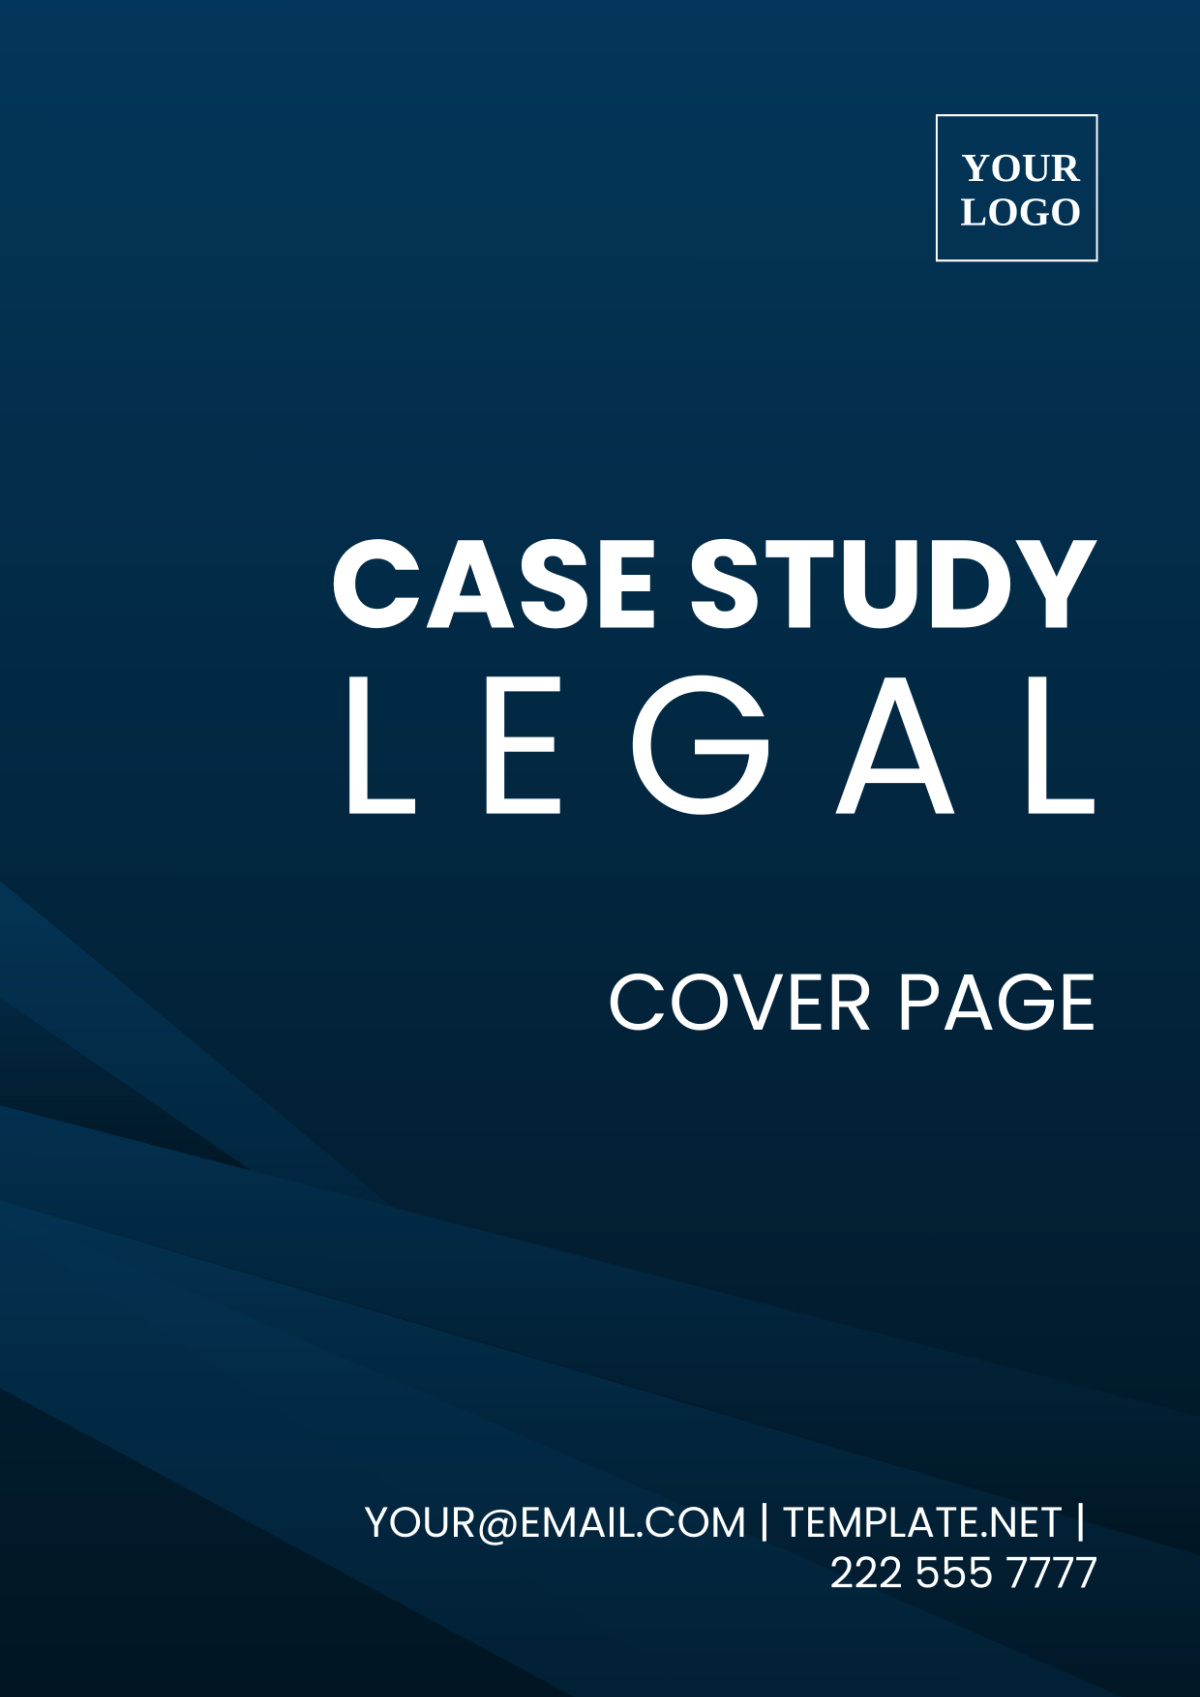 Case Study Legal Cover Page